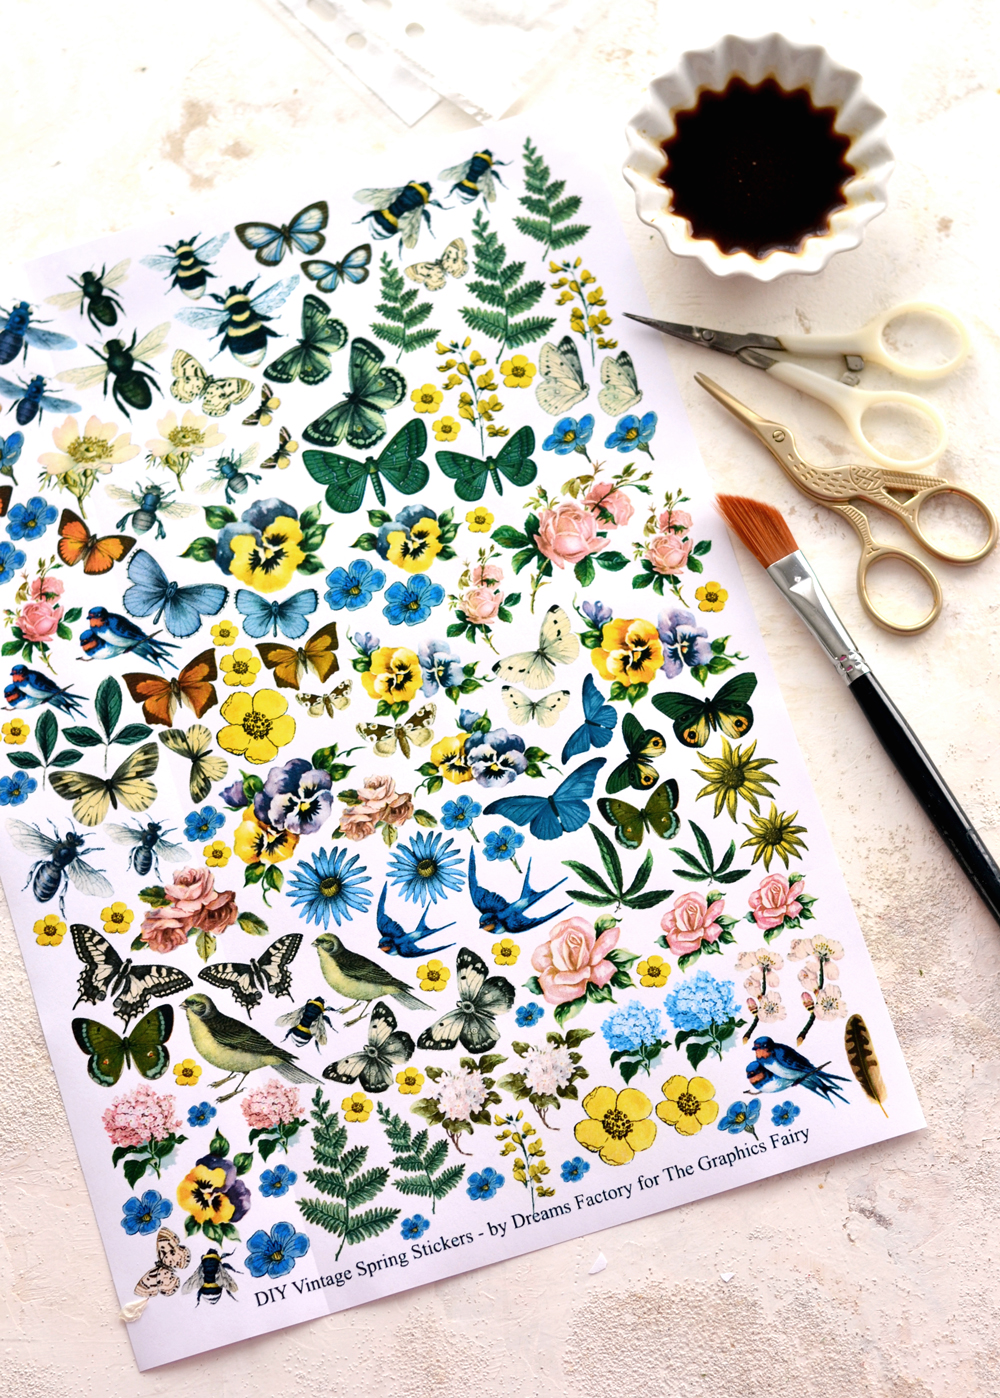 Diy Vintage Spring Stickers Free Printable The Graphics Fairy